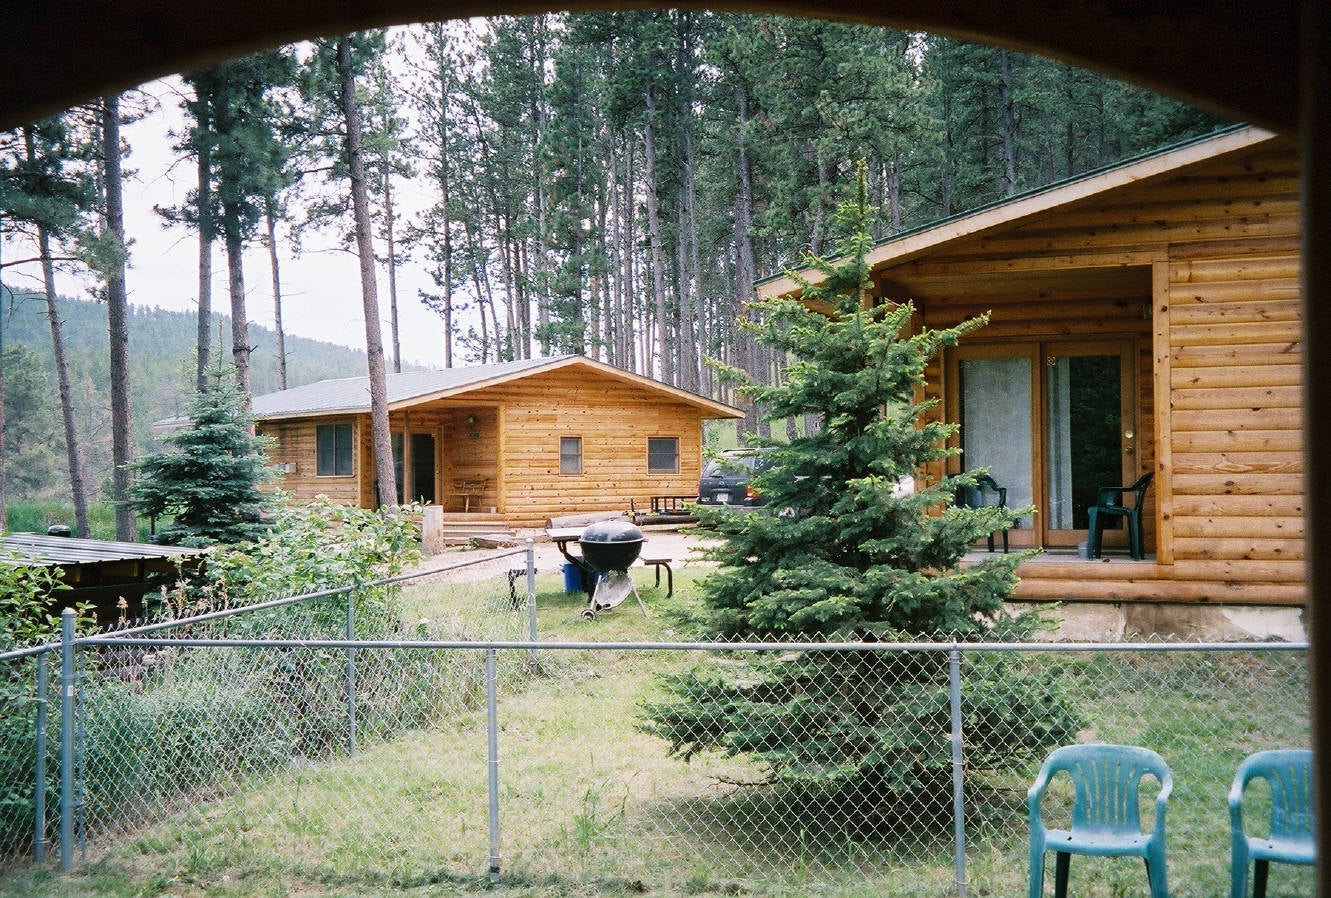 Camper submitted image from Pine Rest Cabins - 2